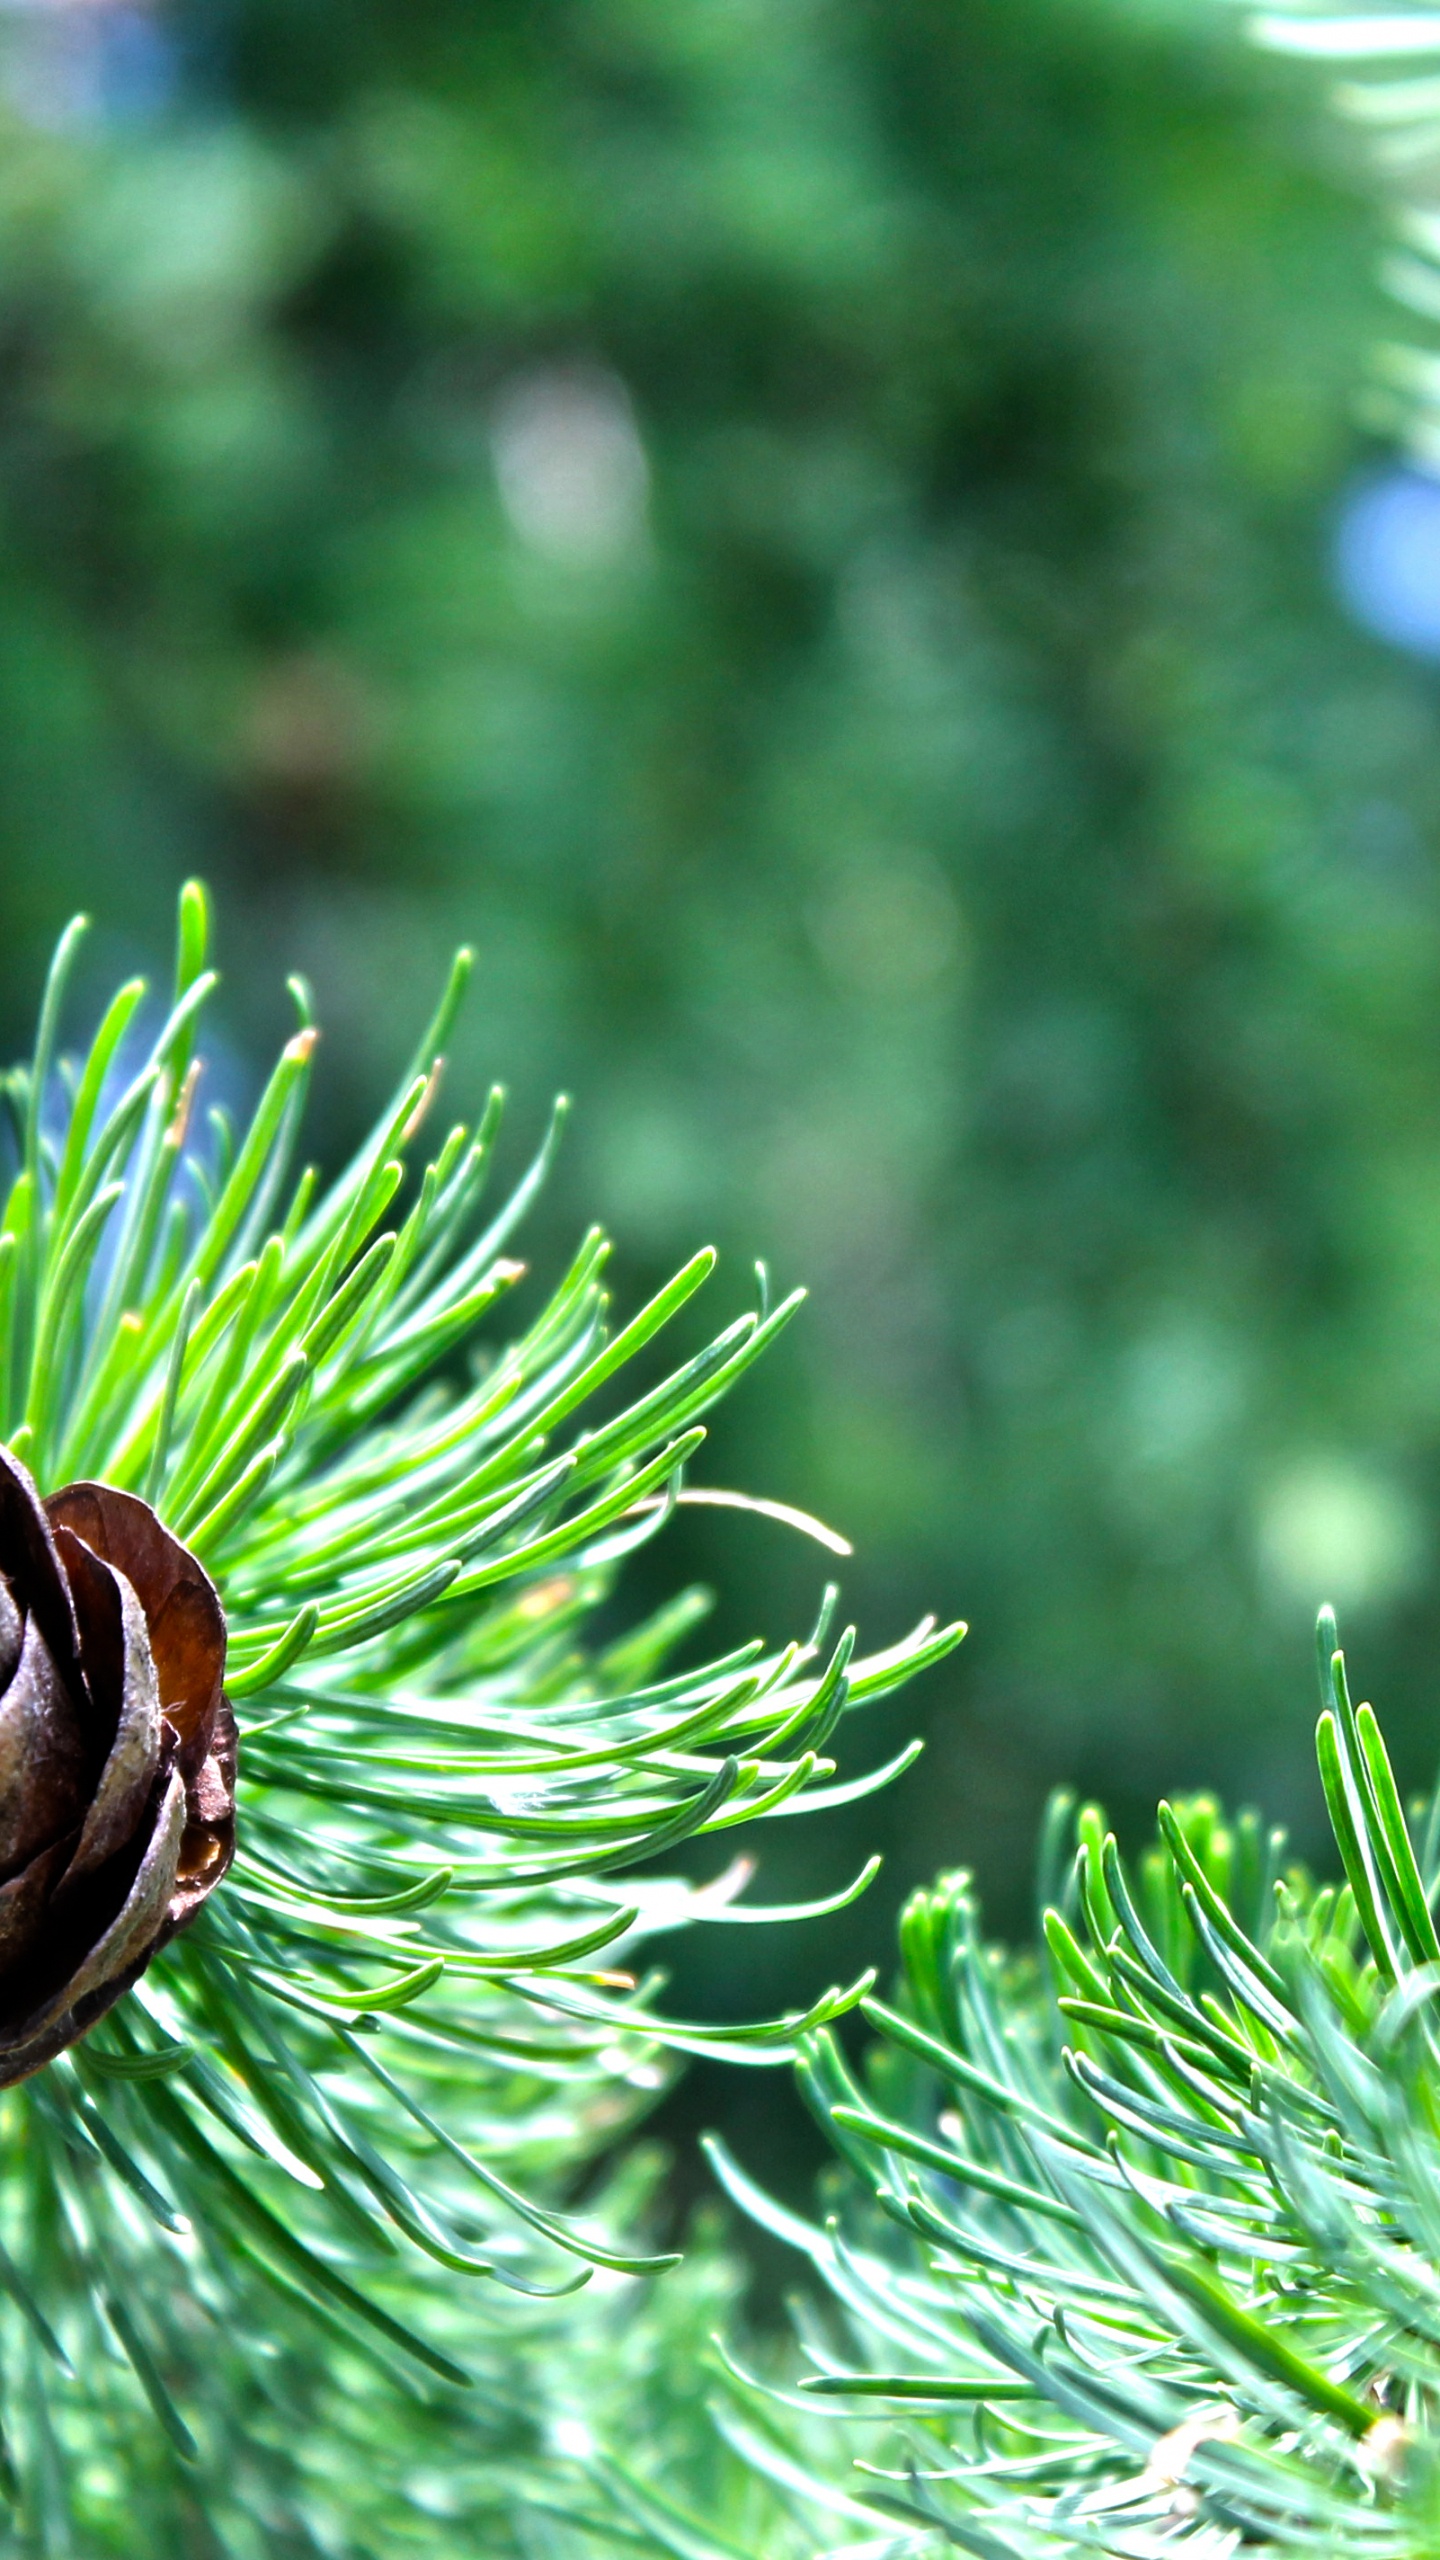 Brown Snail on Green Plant. Wallpaper in 1440x2560 Resolution